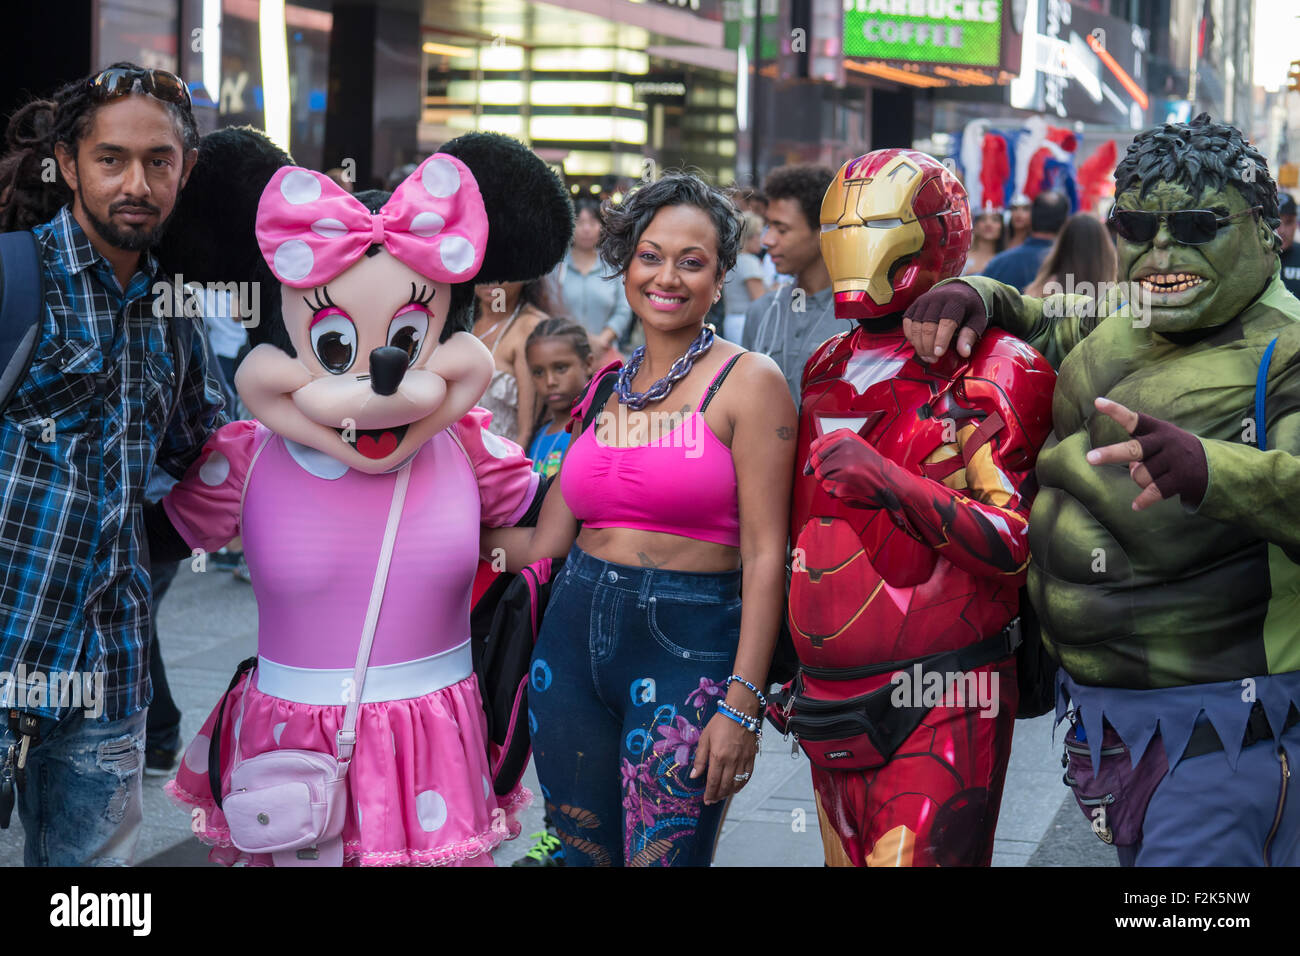 A couple poses for photographs with street performers dressed as Minnie Mouse, Iron Man, and the Hulk in Times Square in New York City. Stock Photo